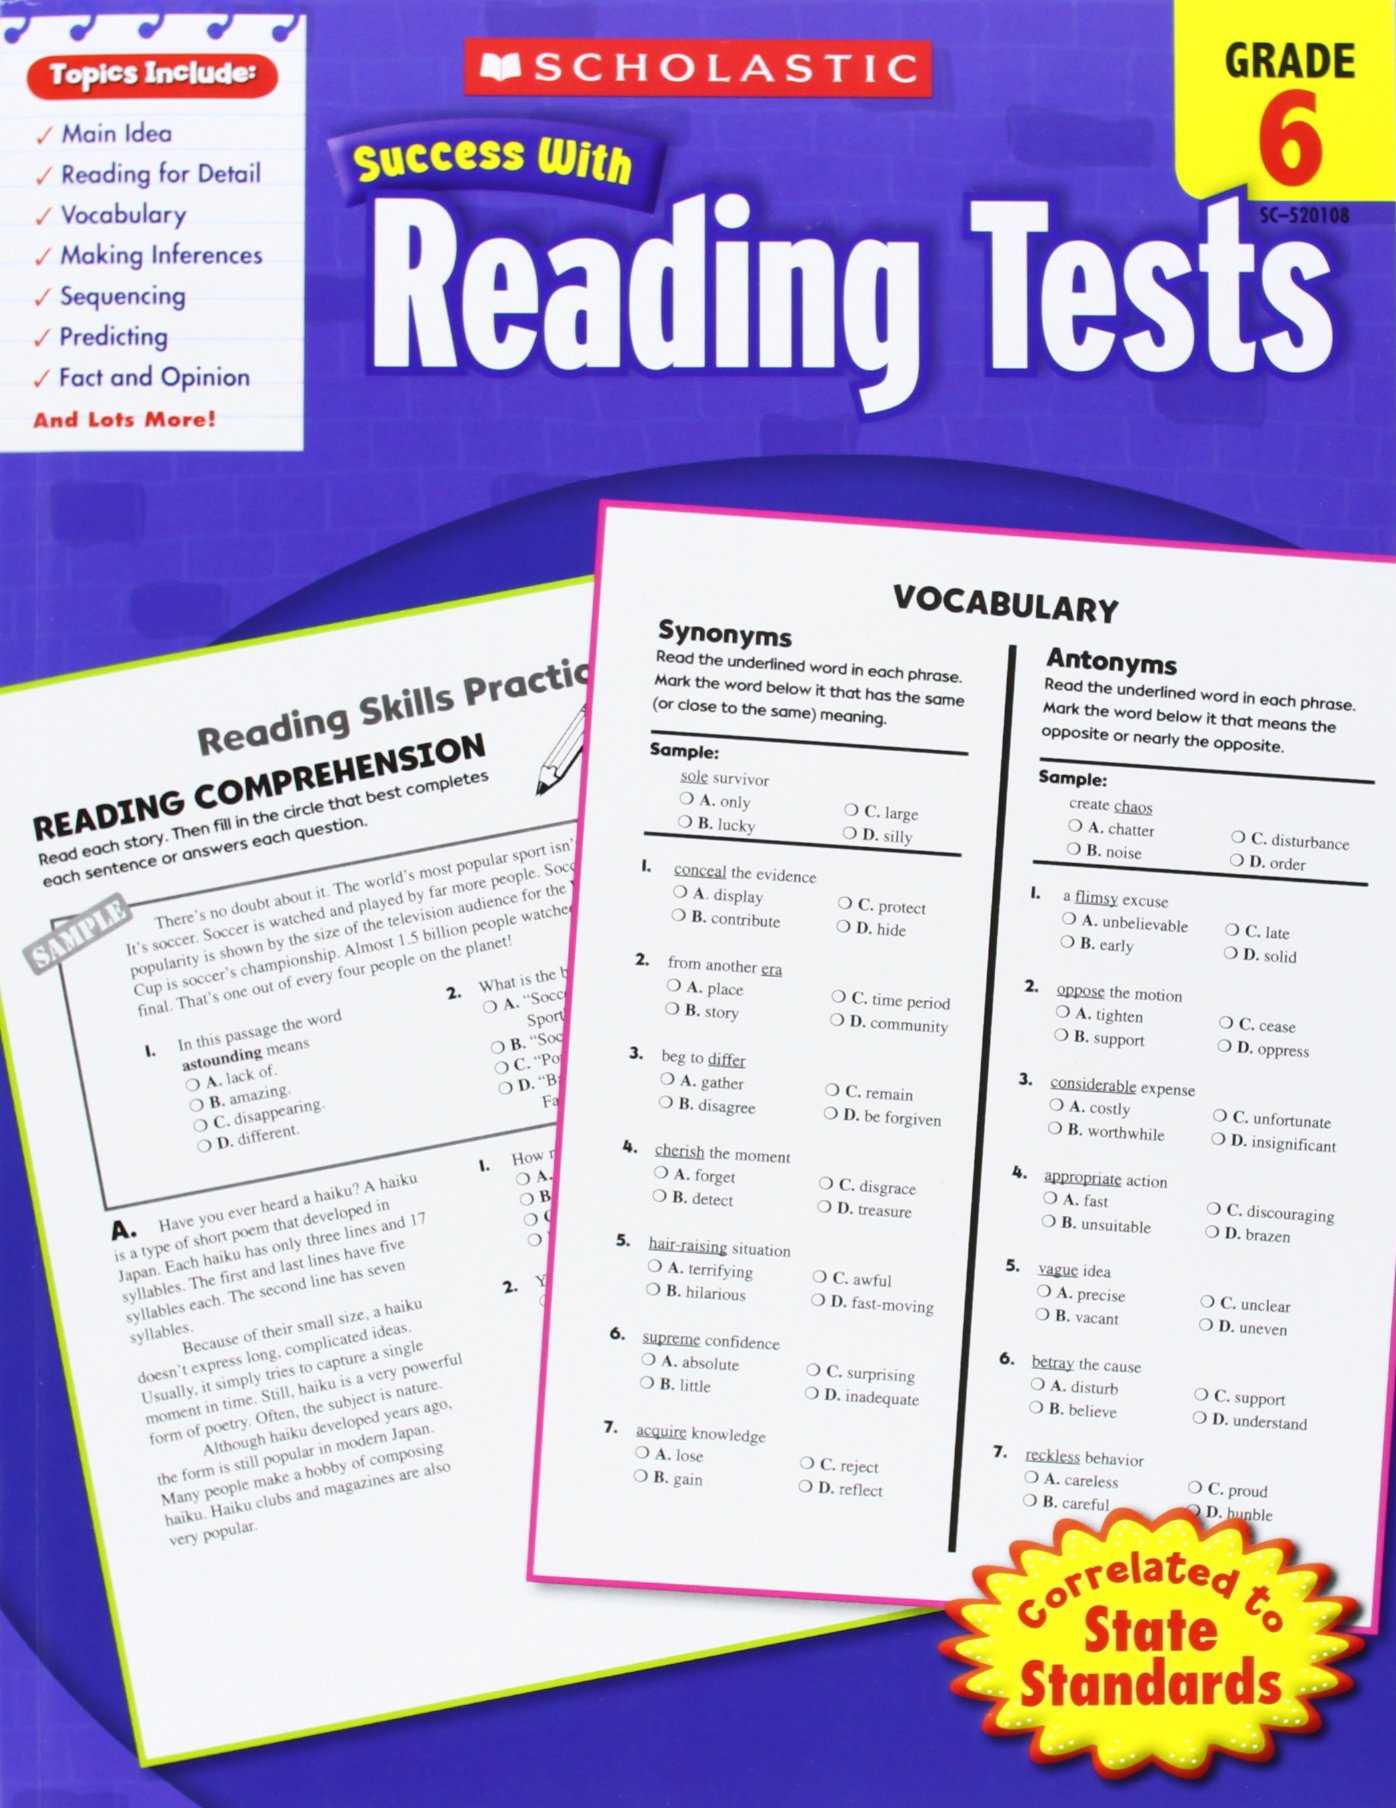 Self Esteem and Self Worth Worksheets Also Amazon Scholastic Success with Reading Tests Grade 6